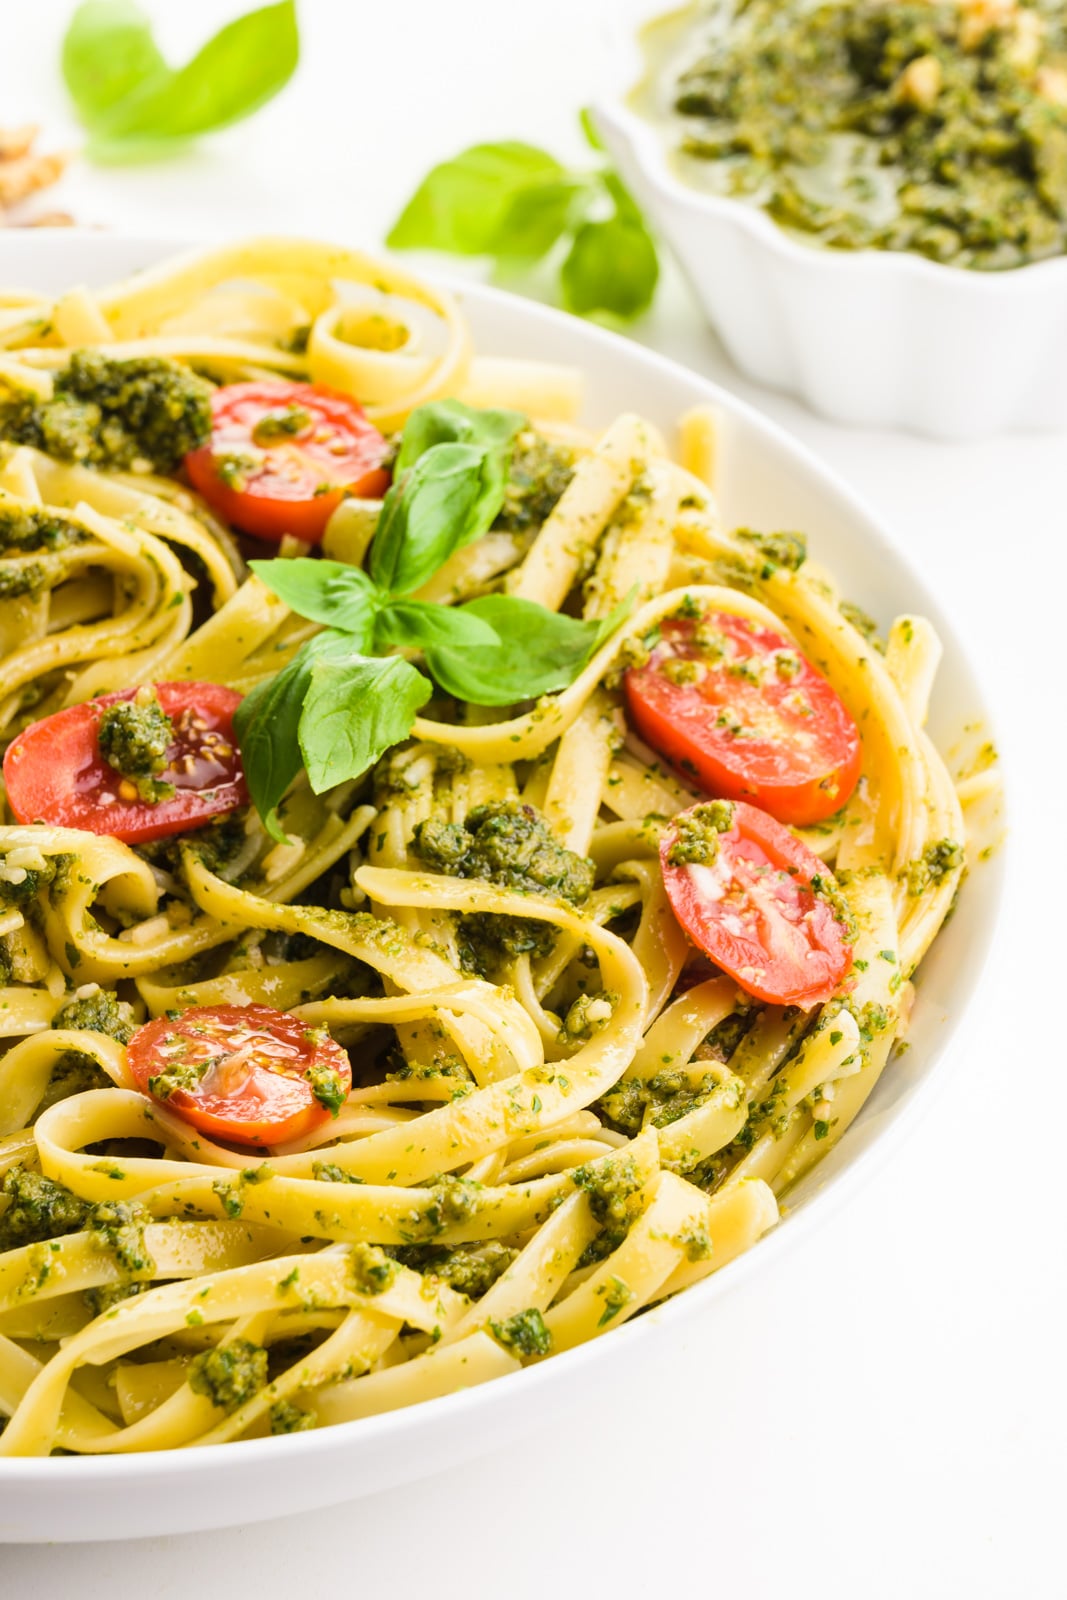 A bowl of pasta has chopped tomatoes and fresh basil leaves on top. Behind it is a bowl of green sauce (pesto) that was added to the pasta as well.